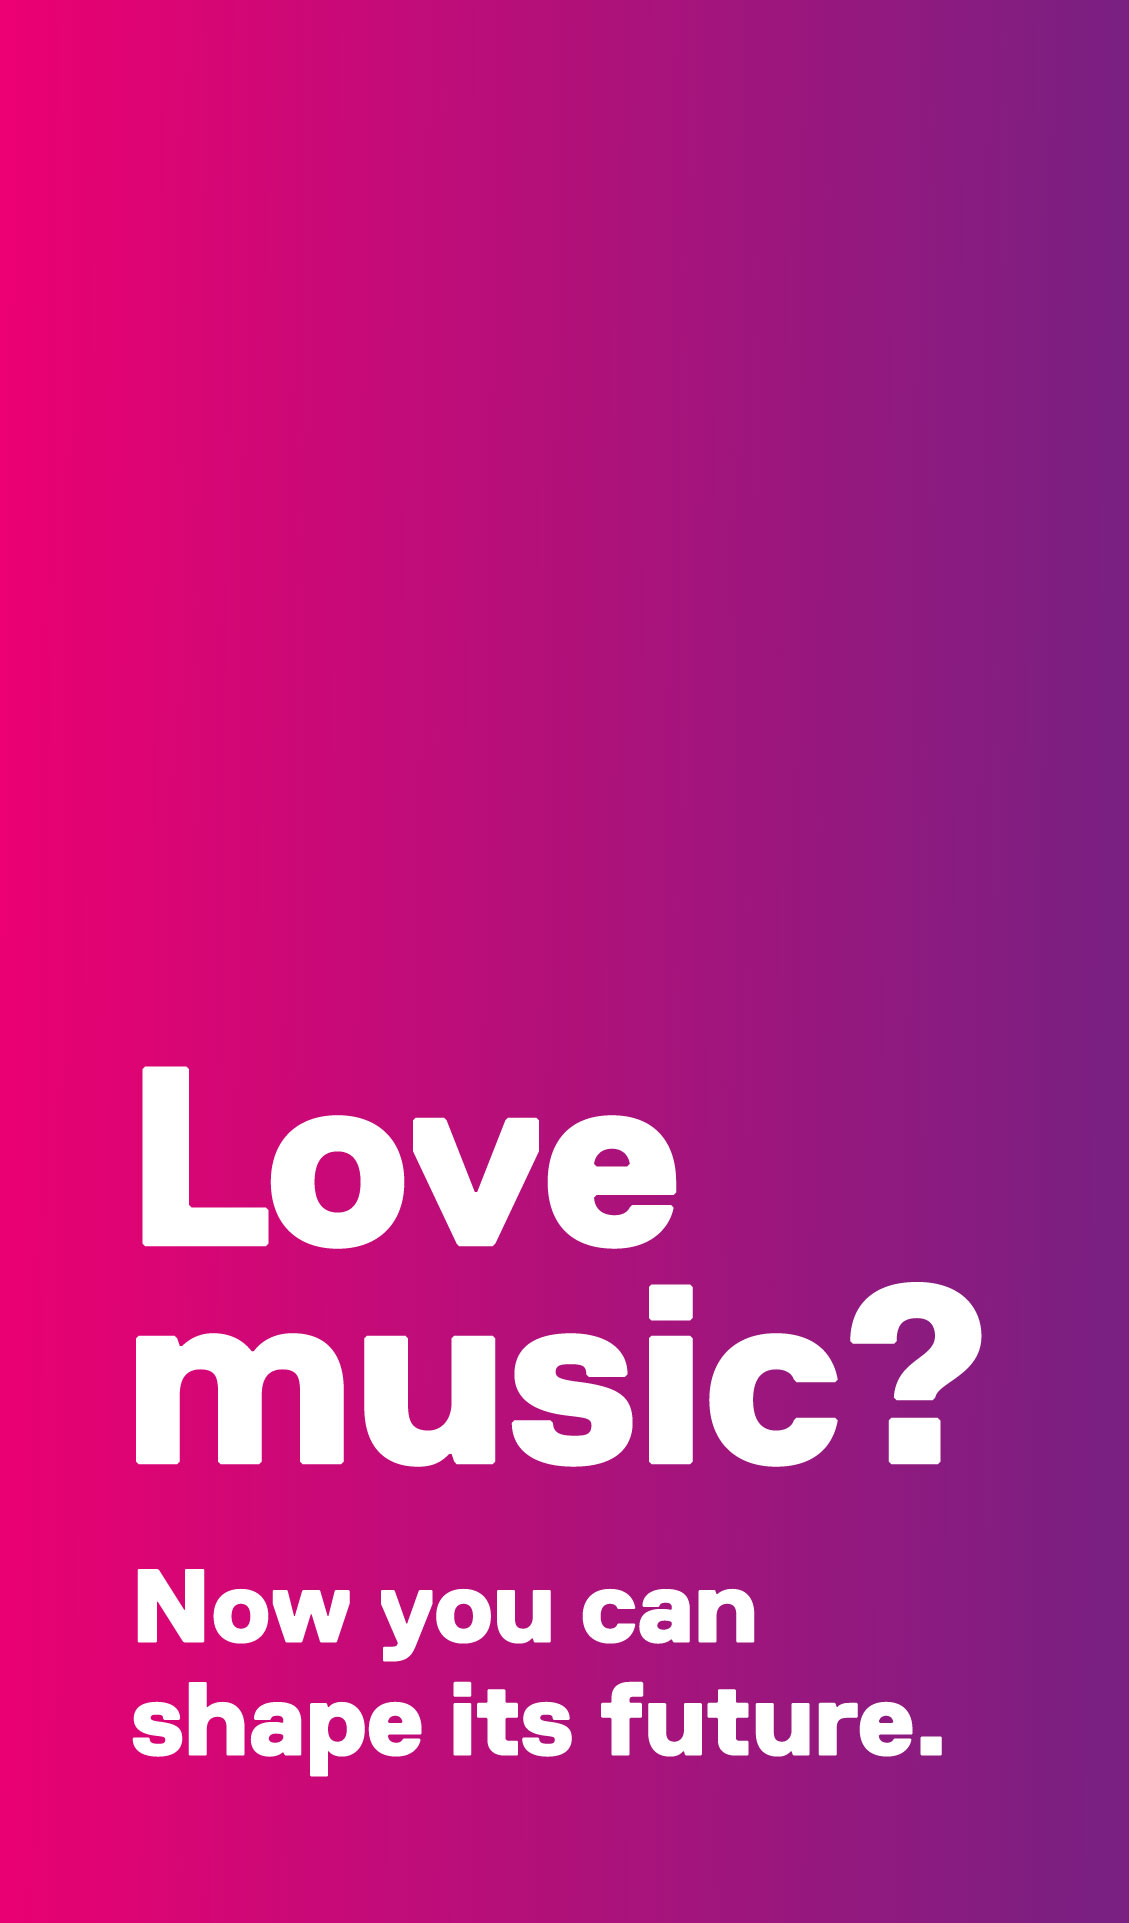 Love music? Now you can shape its future.